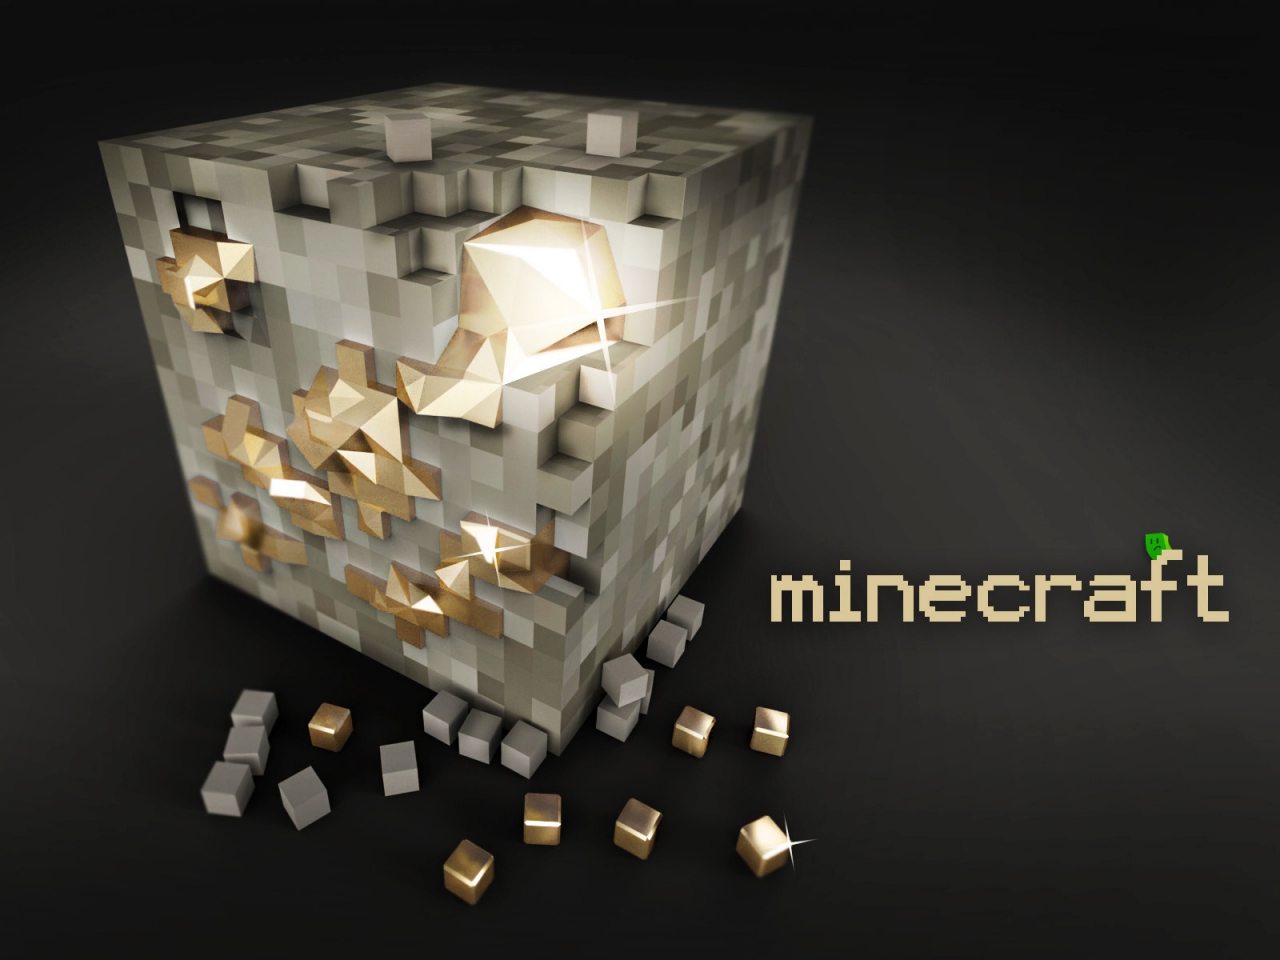 Minecraft Poster for 1280 x 960 resolution